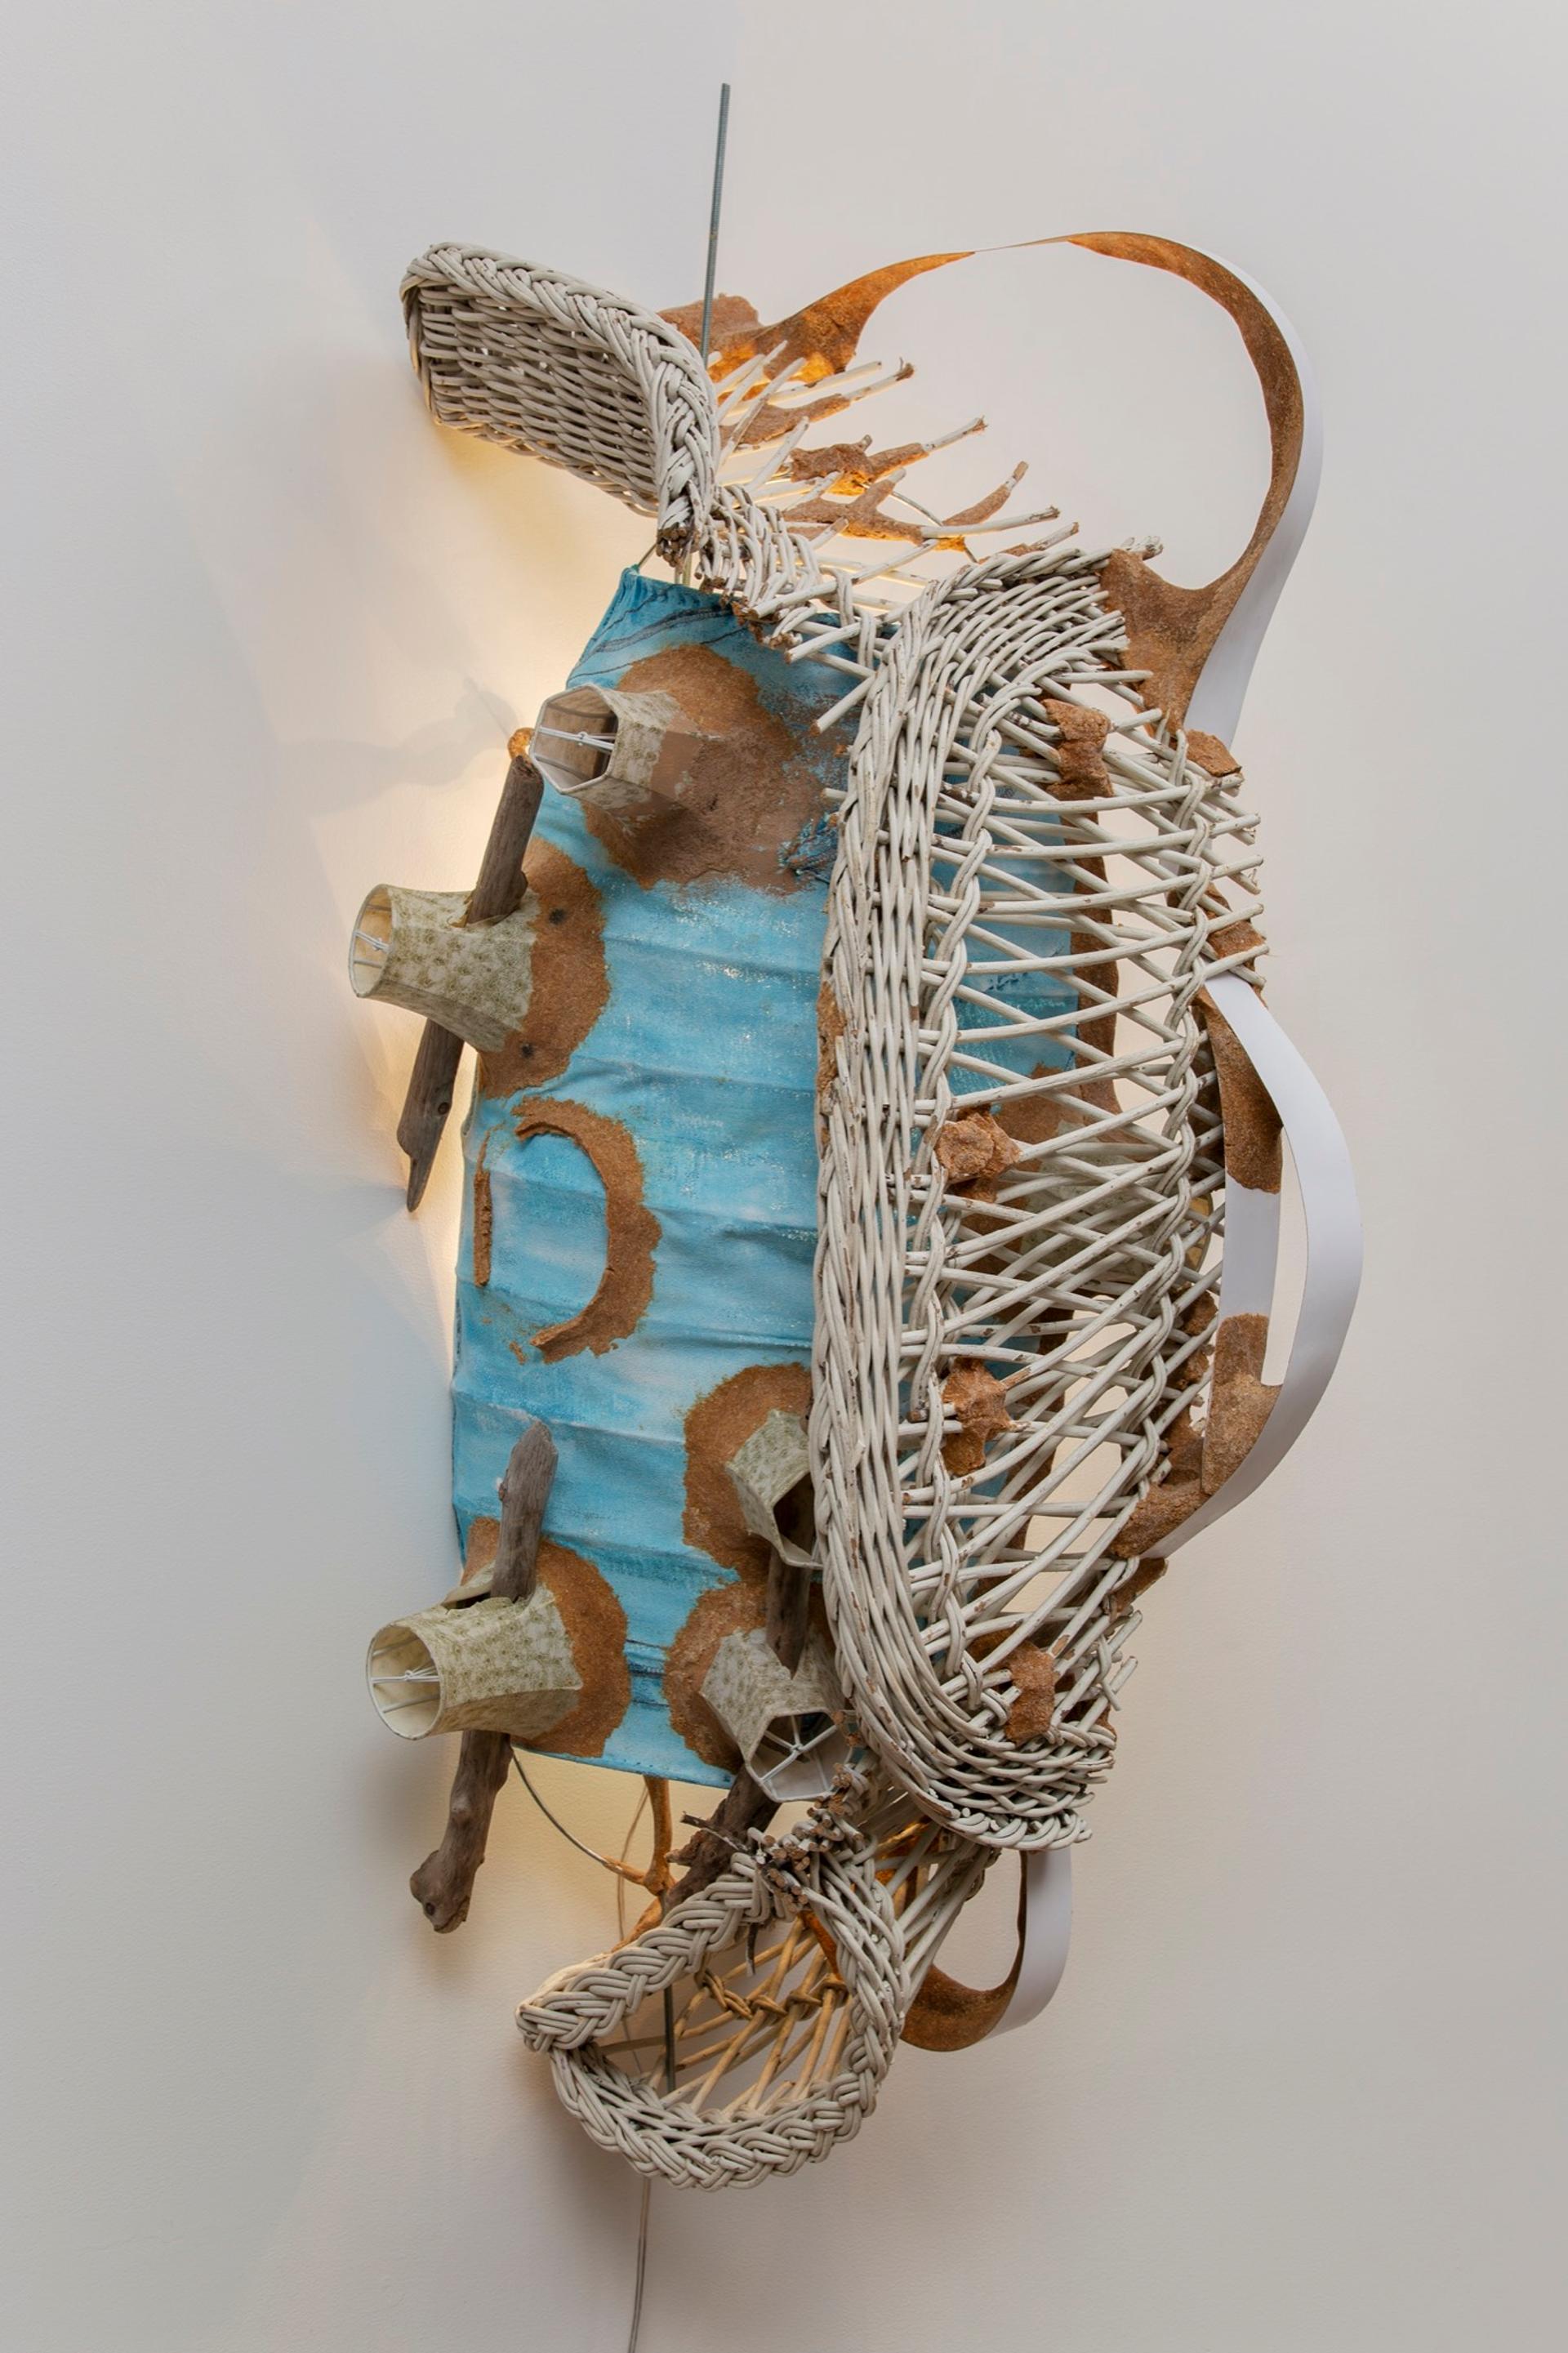 Jessi Reaves, Vicious circle wall lamp, 2019. Wicker, metal, paint, sawdust, woodglue, fabric, driftwood, lamp and wiring 50 × 16 × 23 in. (127.00 × 40.64 × 58.42 cm) Courtesy the artist and Bridget Donahue, NYC. Photo: Gregory Carideo